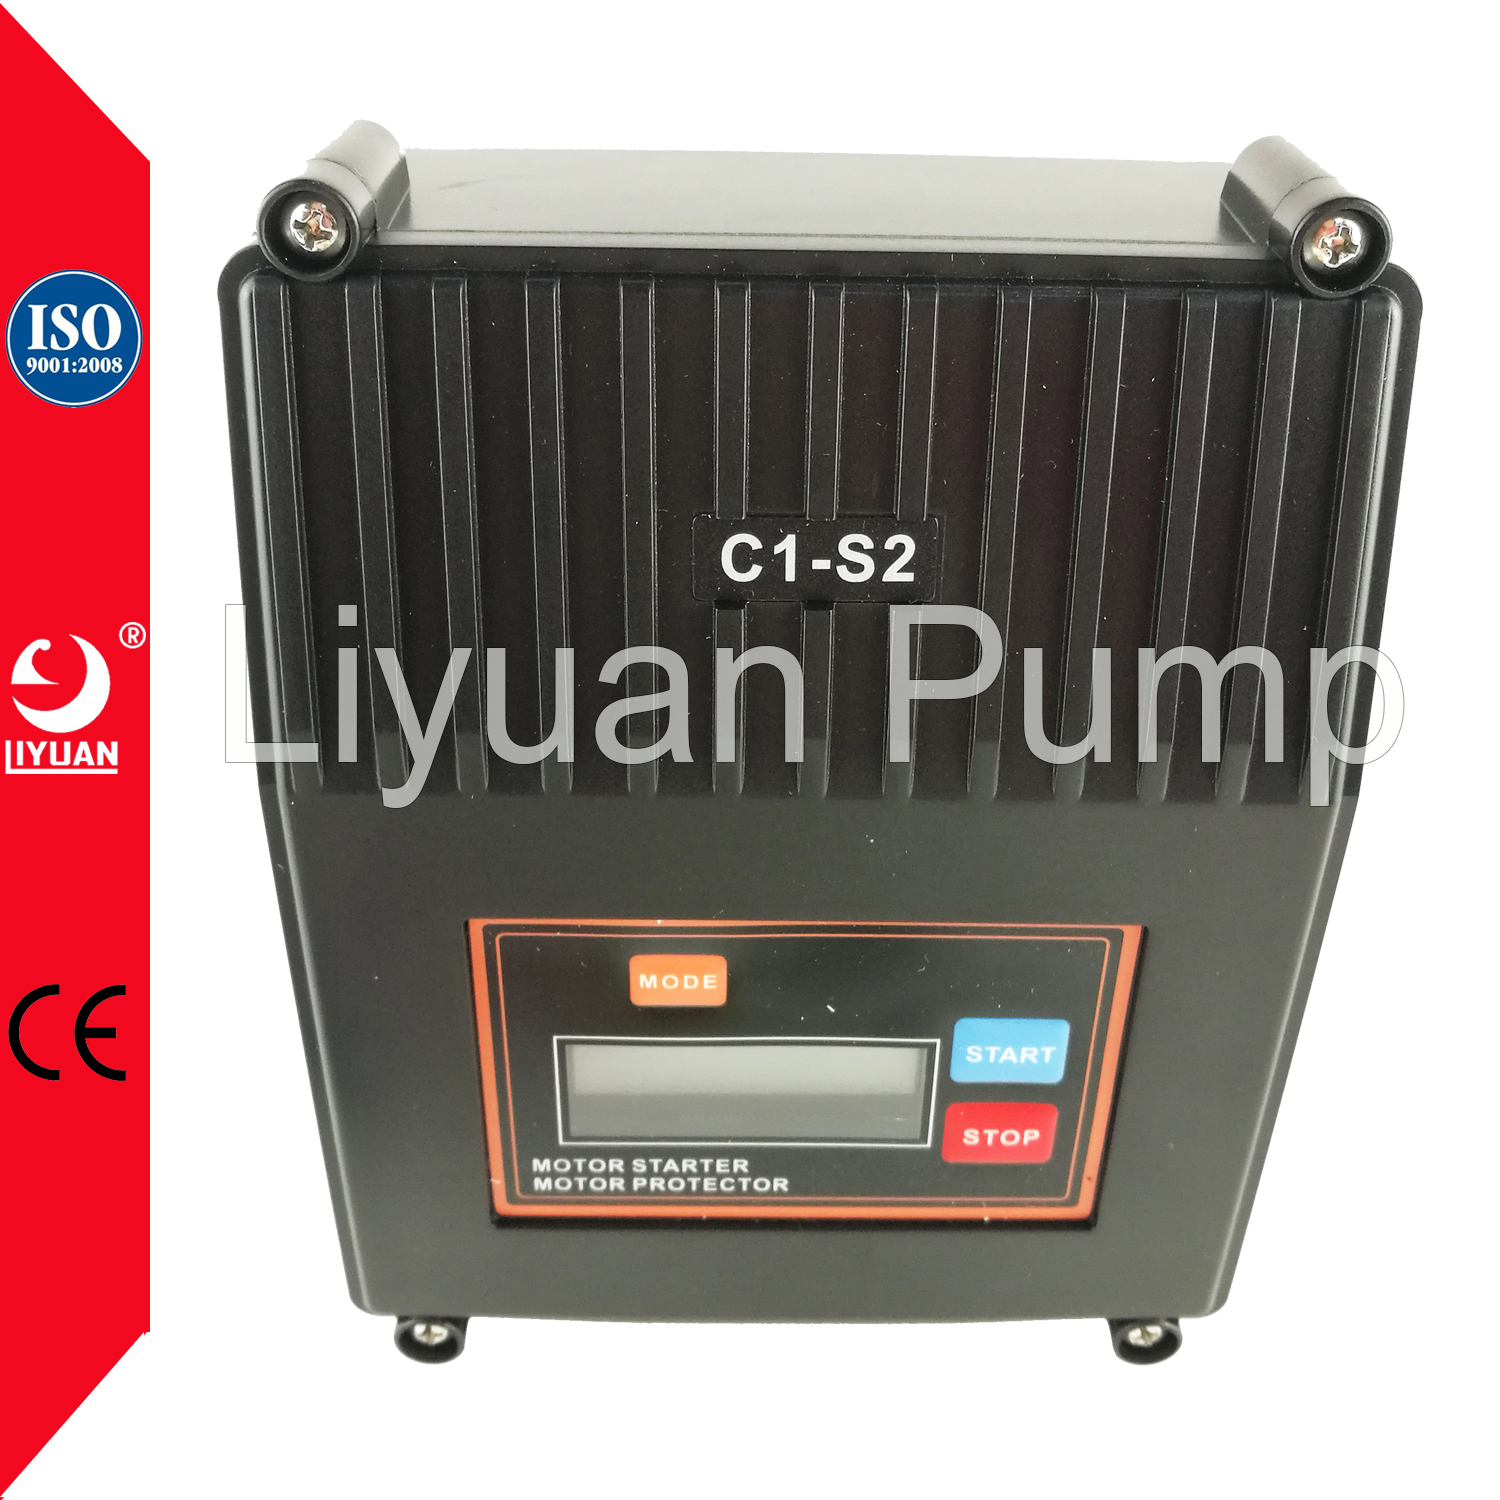 Electronic Pressure Controllers, Smart Pump Drive